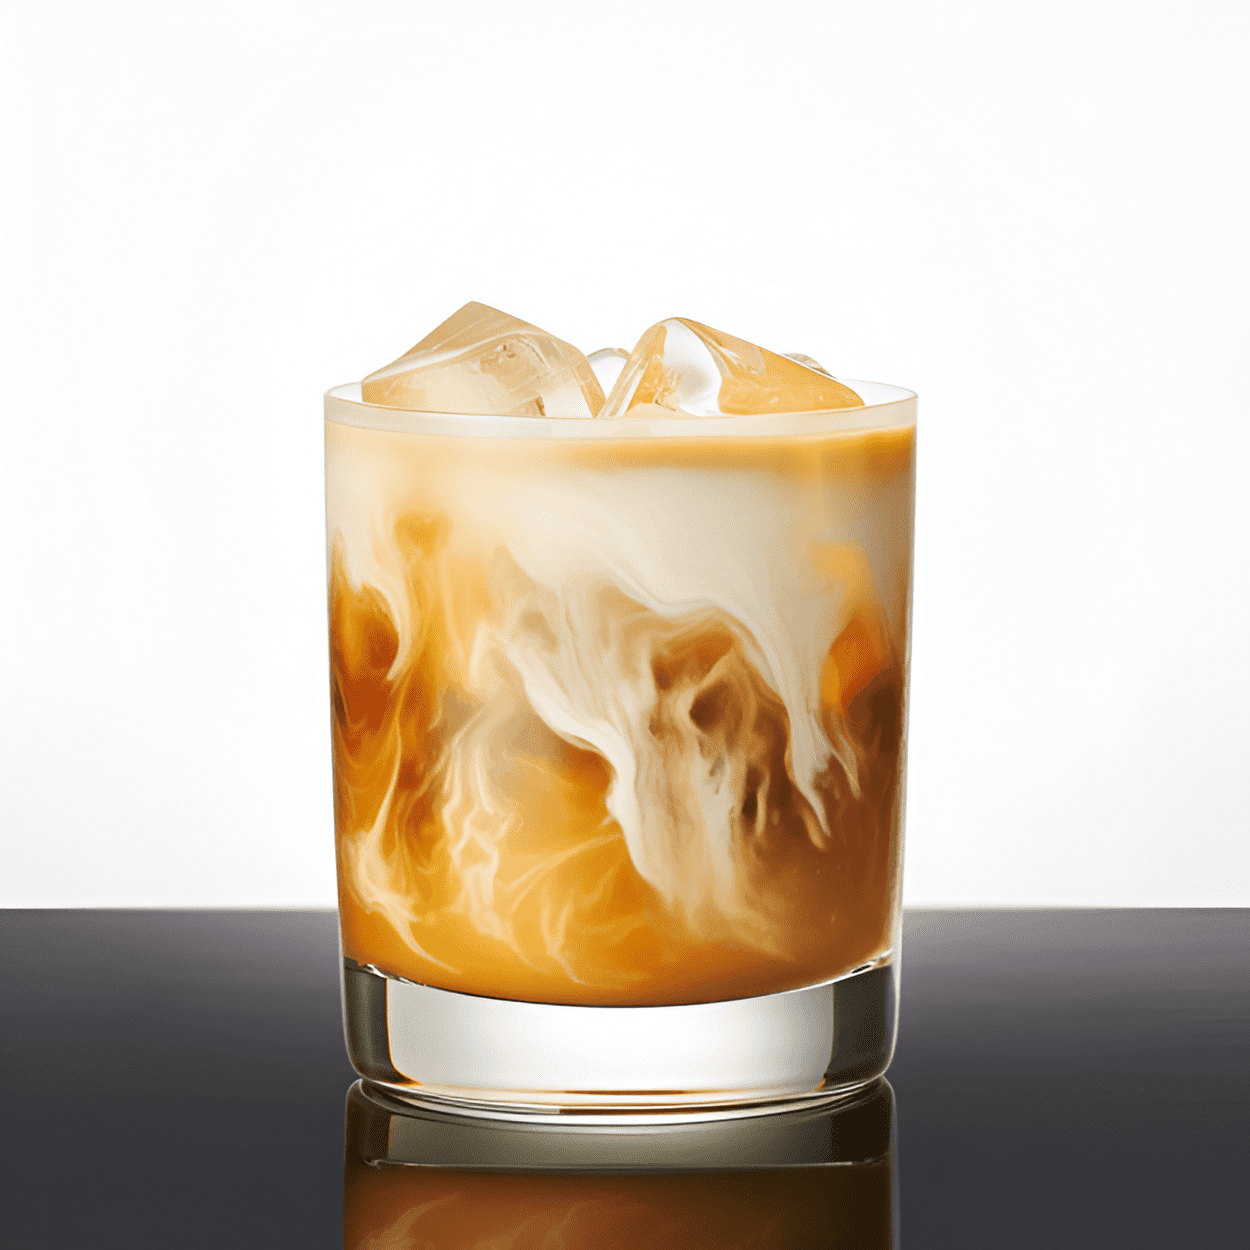 Blonde Russian Cocktail Recipe - The Blonde Russian is a sweet, creamy cocktail with a rich, buttery flavor. The butterscotch schnapps gives it a caramel-like sweetness, while the cream adds a luxurious, velvety texture. The vodka provides a subtle kick, balancing out the sweetness and adding depth to the drink.